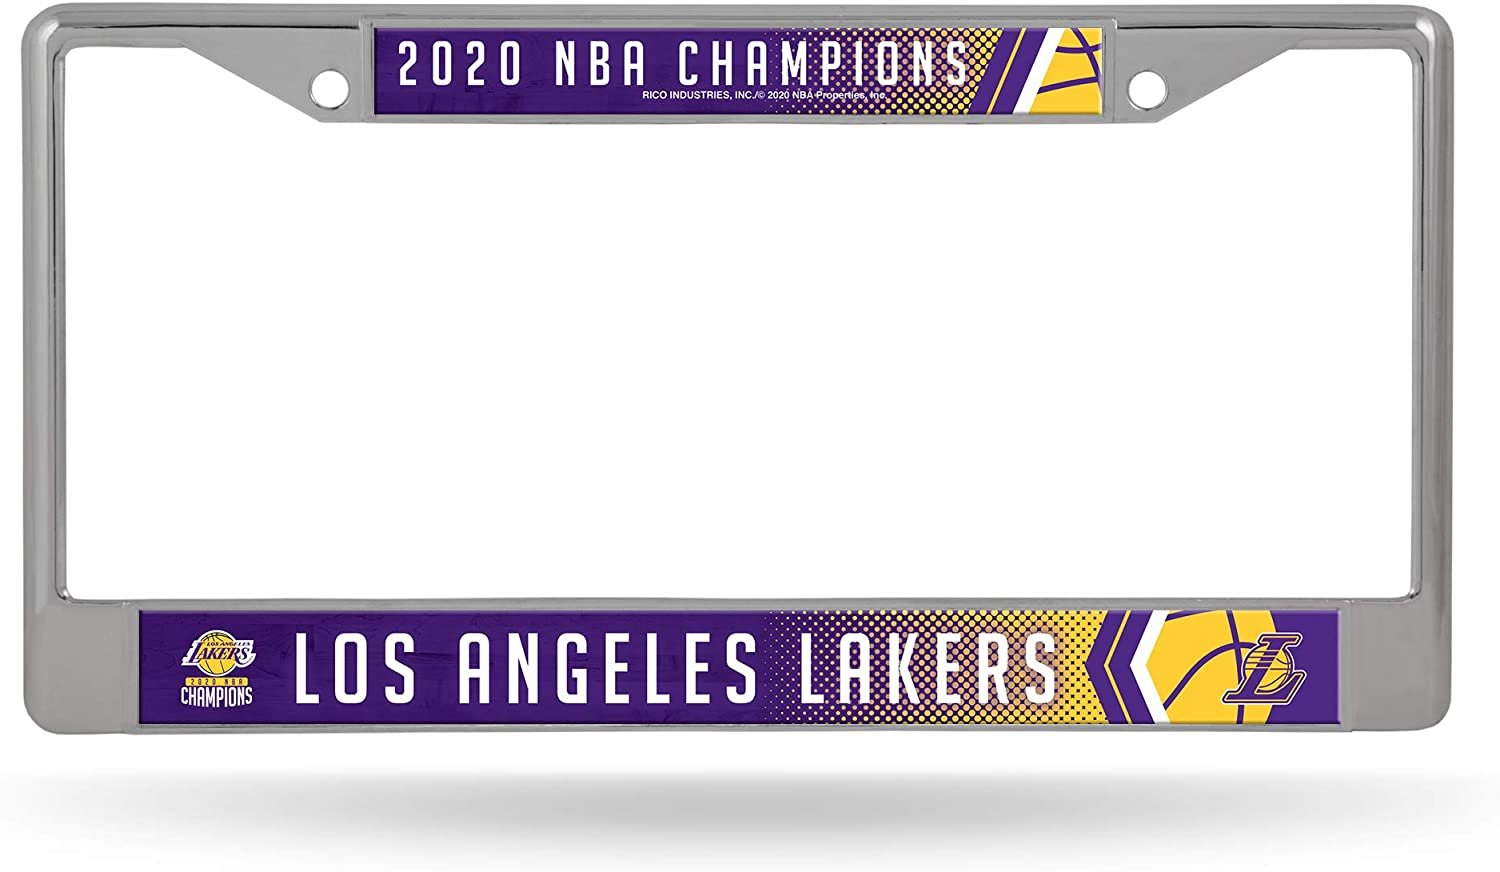 Los Angeles Lakers 2020 Champions Metal License License Plate Frame Chrome Tag Cover, 12x6 Inch